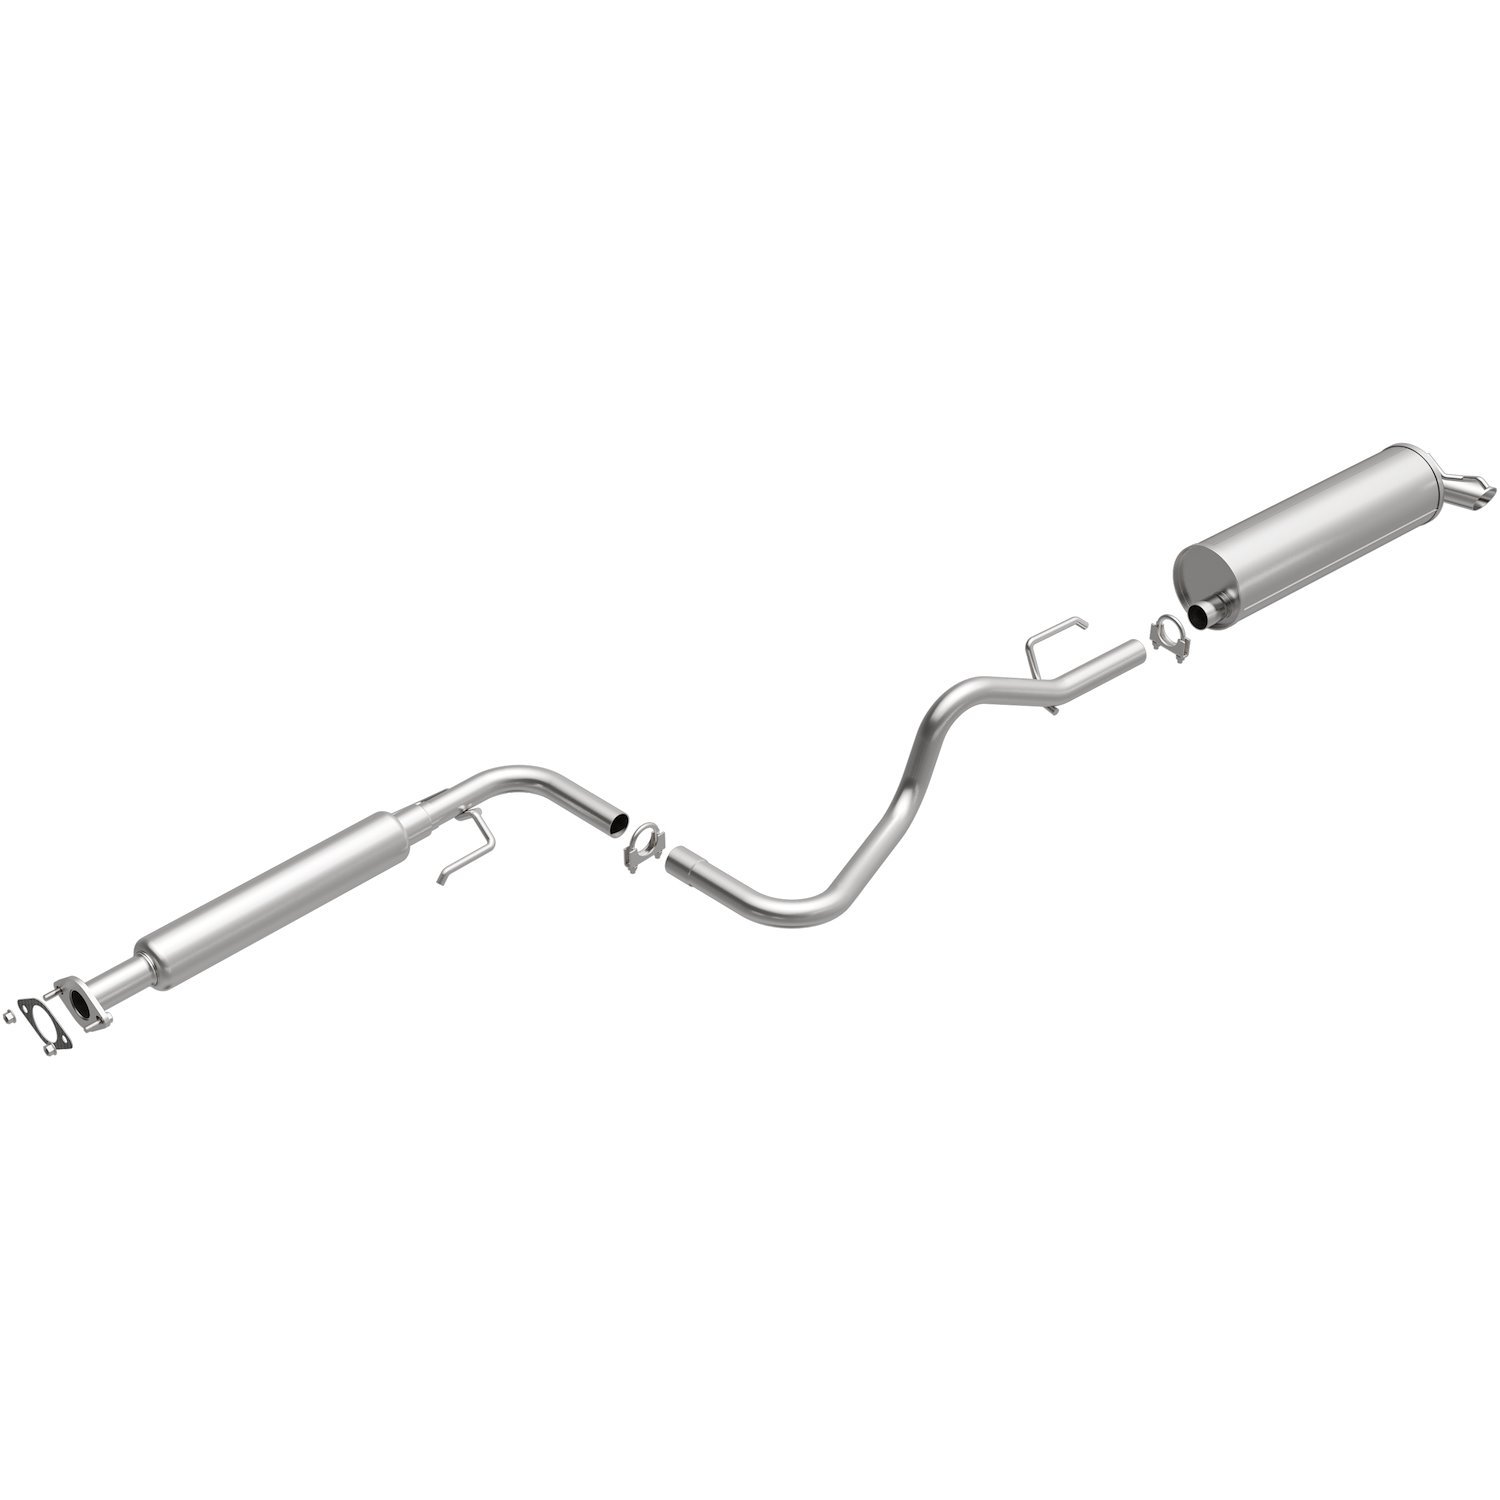 Direct-Fit Exhaust Kit, 2005-2007 Saturn Ion 2.2L